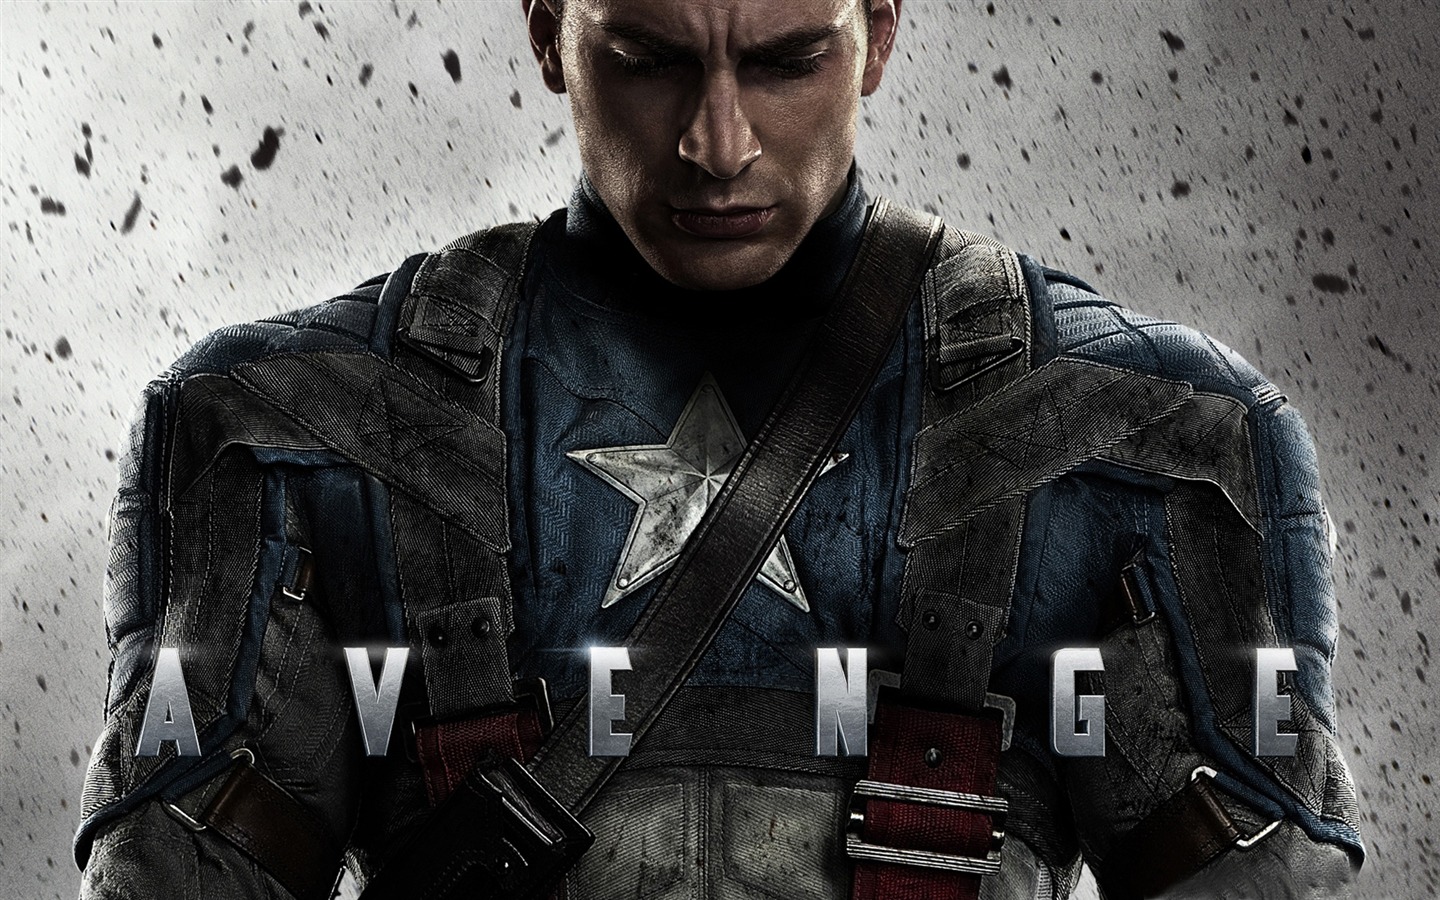 Captain America: The First Avenger wallpapers HD #14 - 1440x900